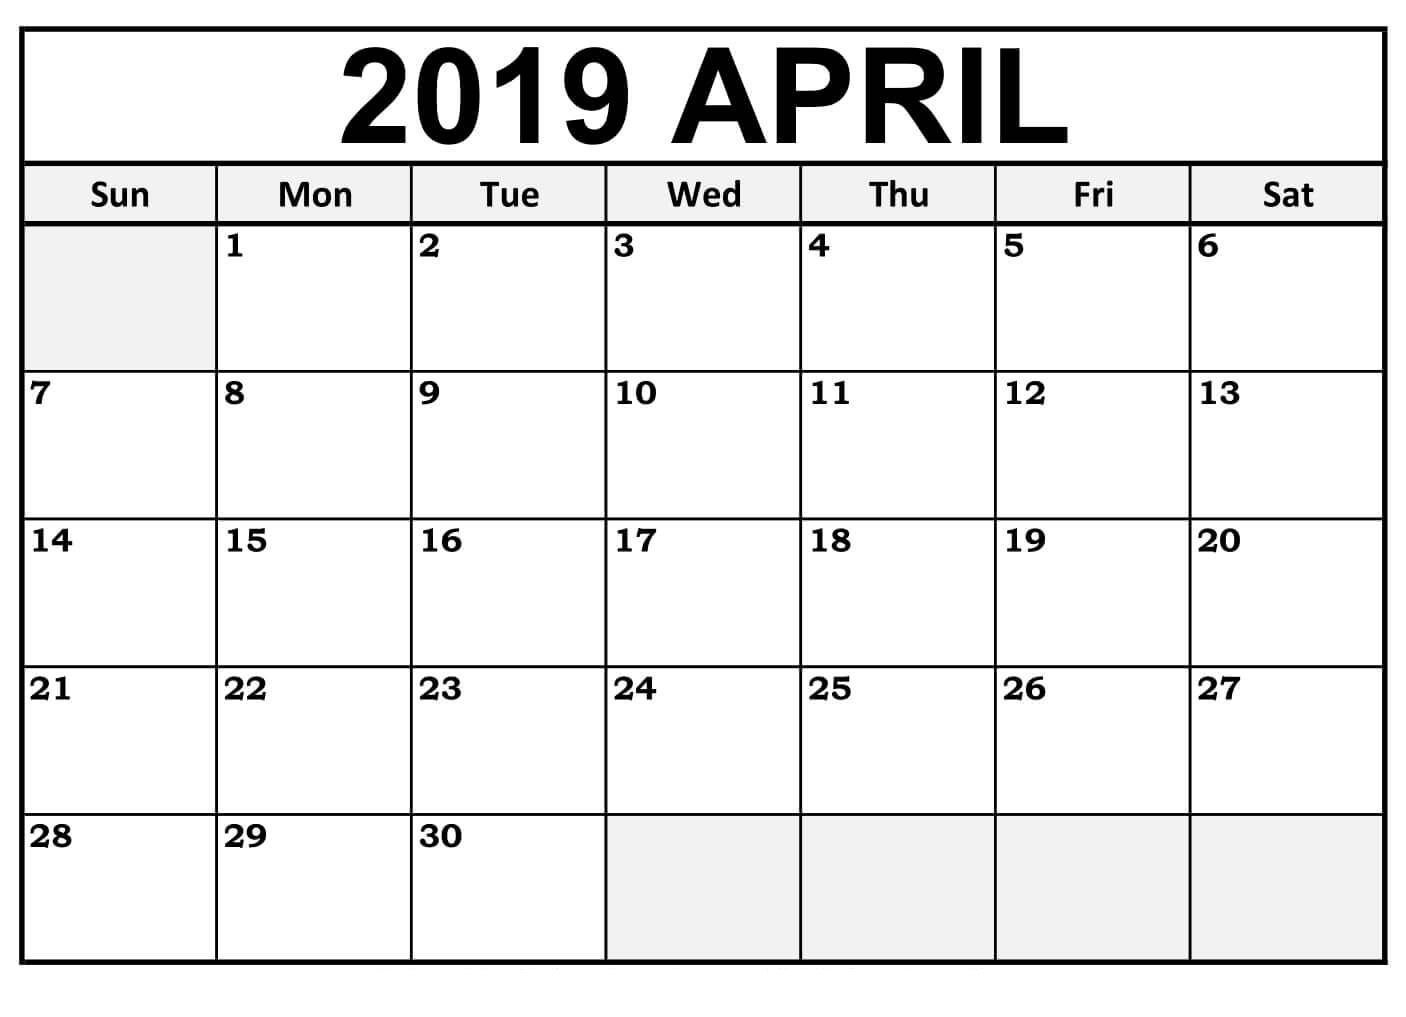 Create Your Free Printable Monthly Calendar Without Download | Calendar pertaining to Calendars To Print Without Downloading